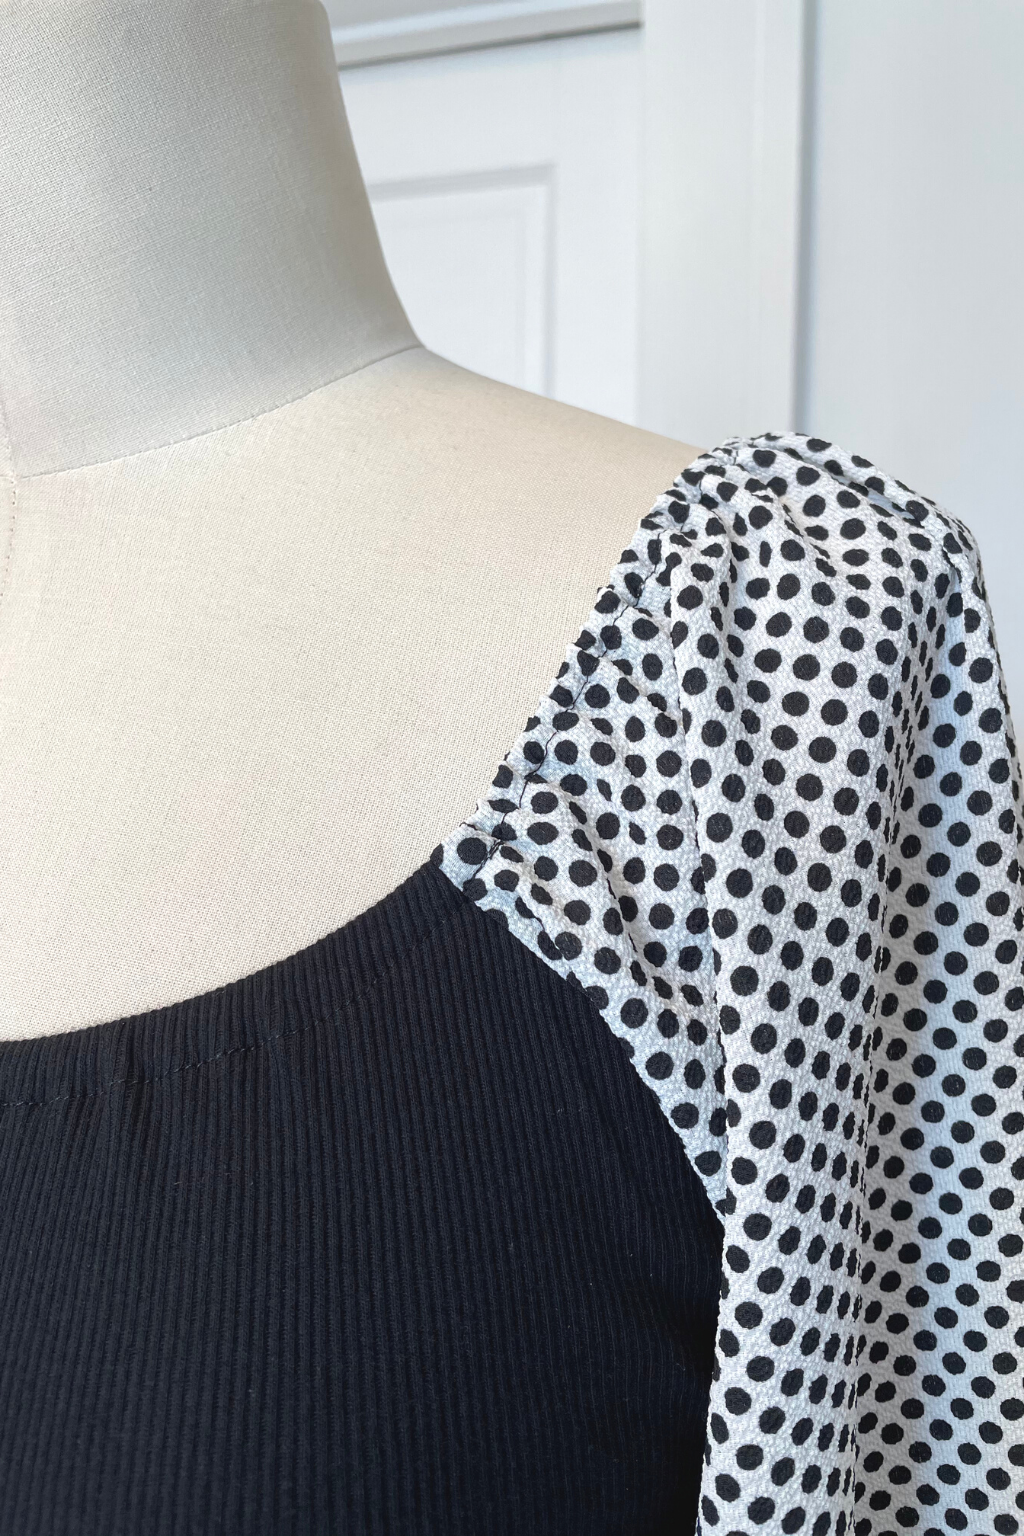 KOKOON Hutton Square Neck Dress in Black Rib Knit With White and Black Polka Dot Sleeves Front Detail